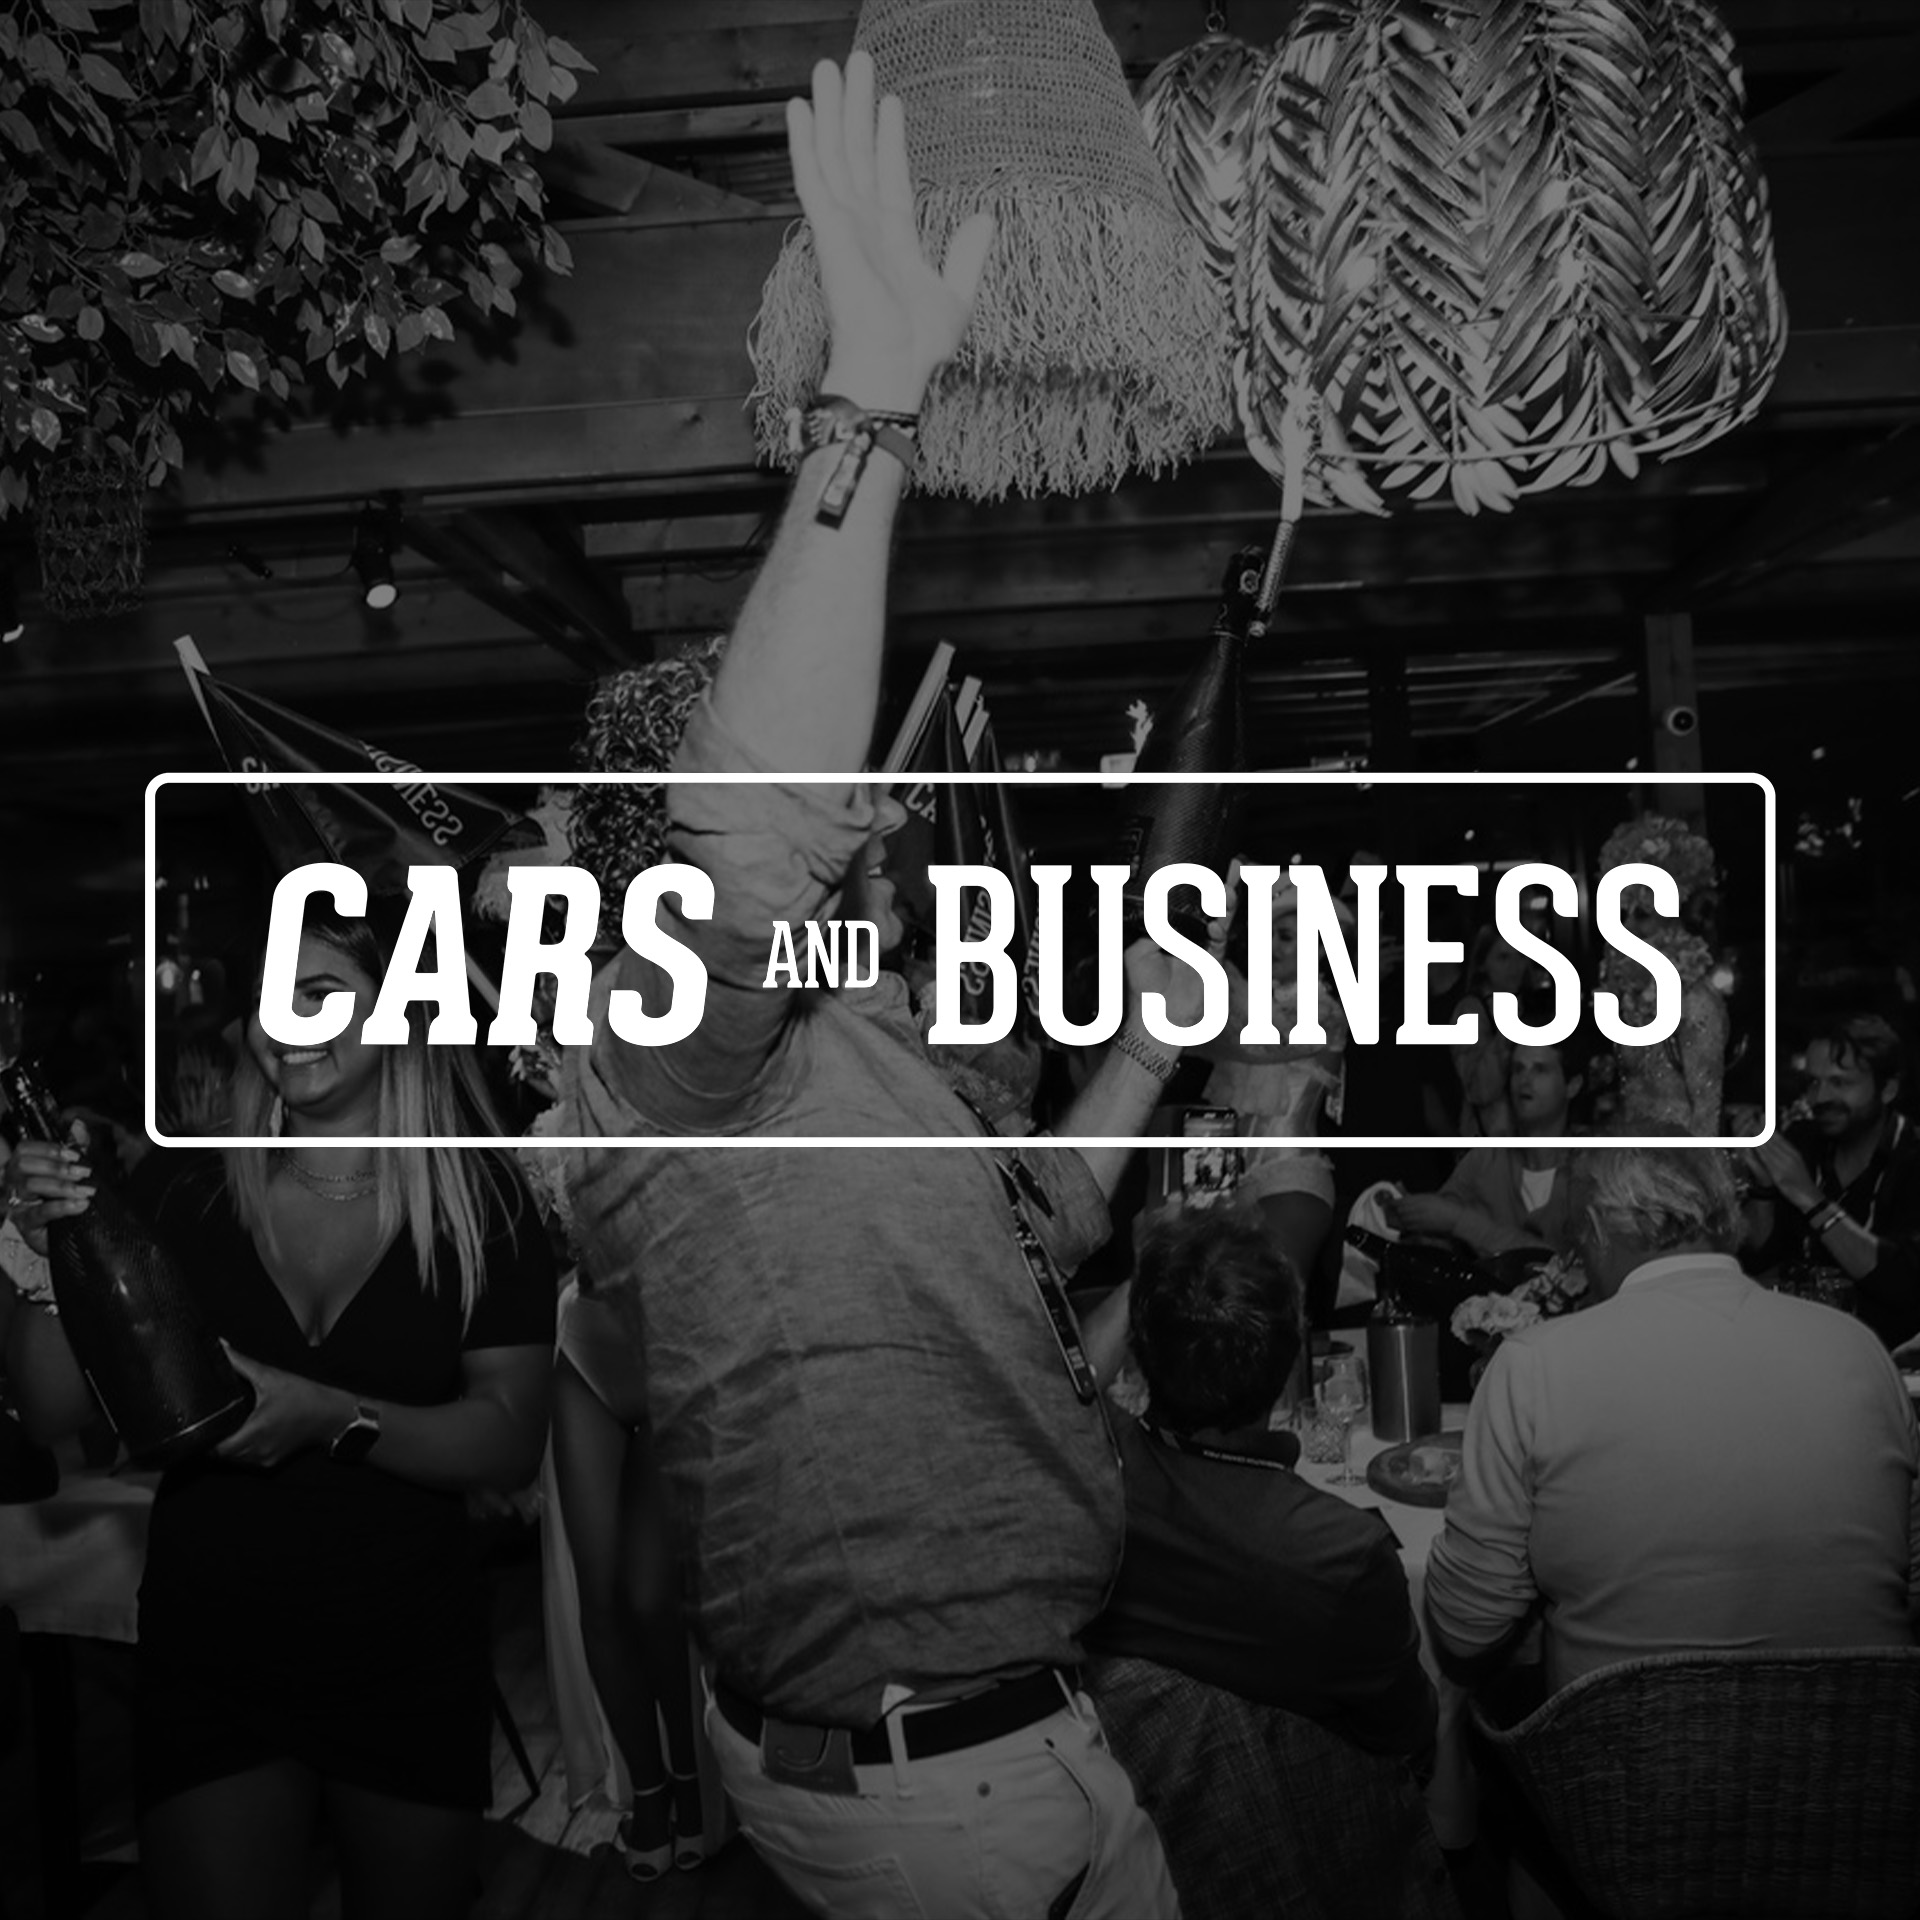 Cars and Business